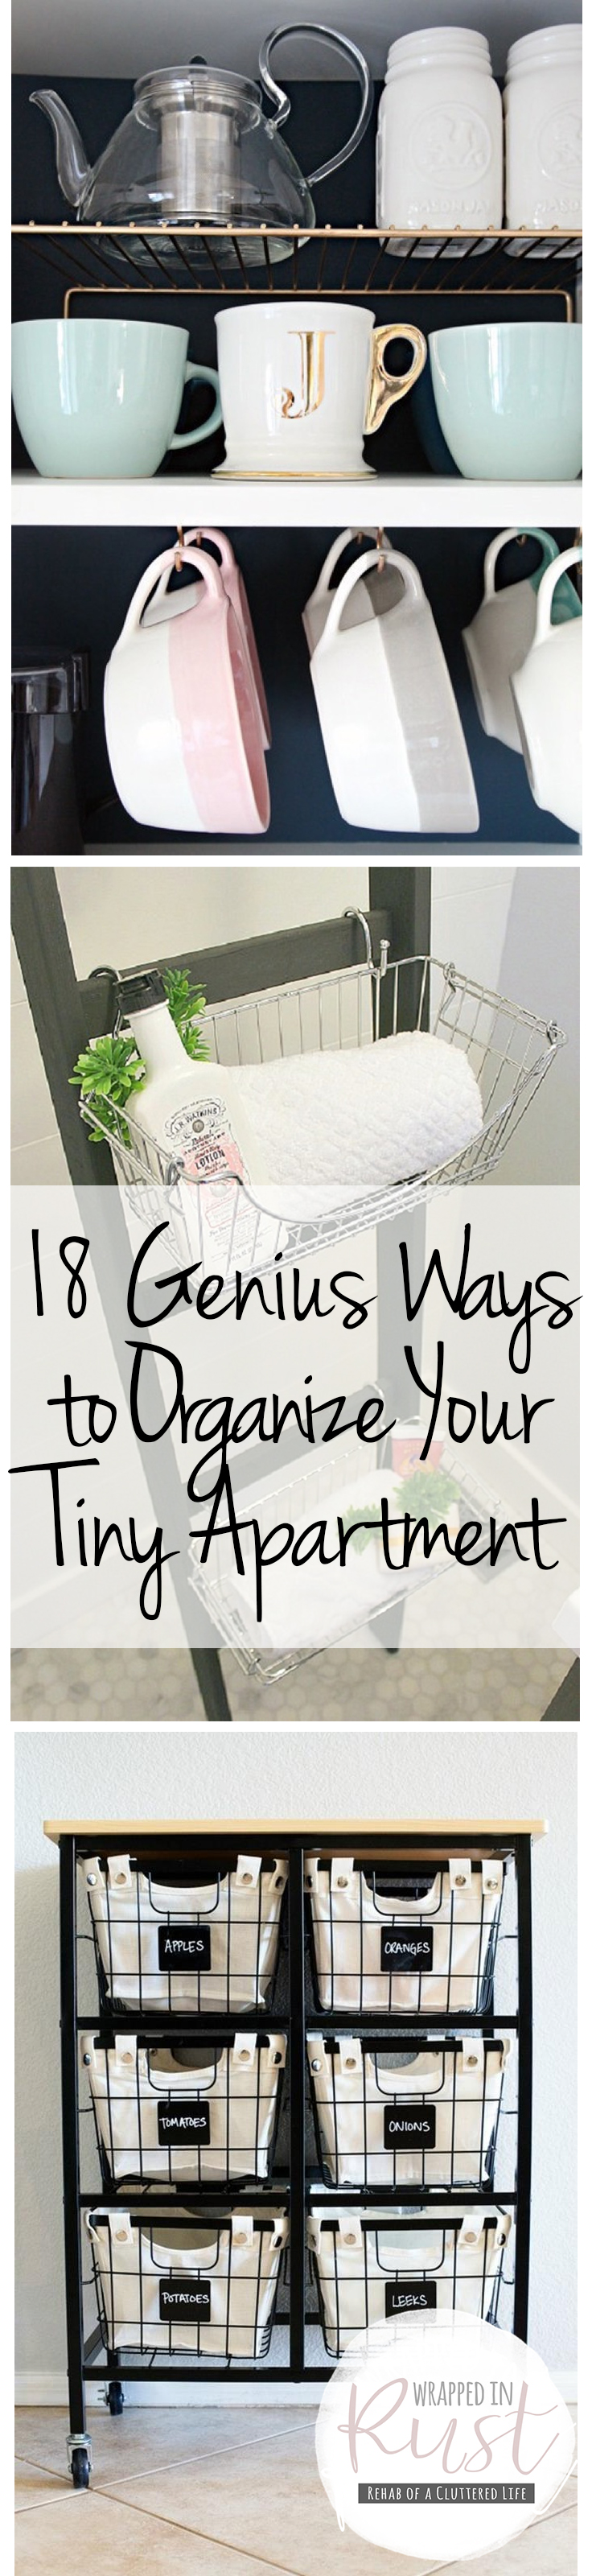 Organizing Apartments, How to Organize Your Apartment, Easy Ways to Organize Your Apartment, Apartment Organization Hacks, How to Declutter Your Apartment, Small Apartment Organization, How to Organize Your Small Apartment